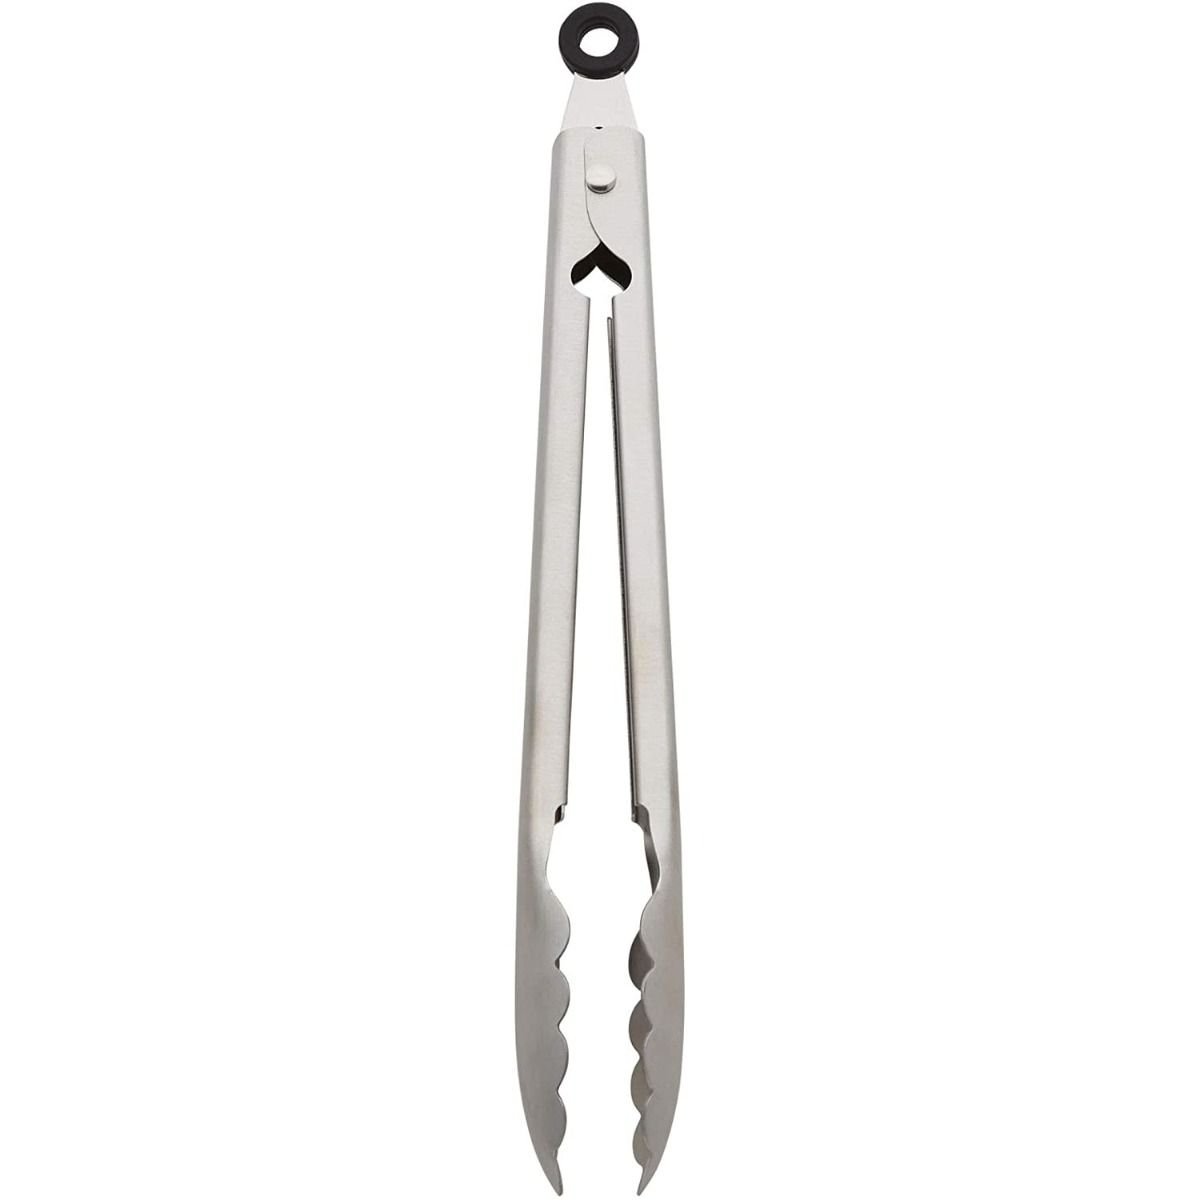  KitchenAid Universal Utility and Serving Stainless Steel  Kitchen Tongs, Set of 2: Home & Kitchen